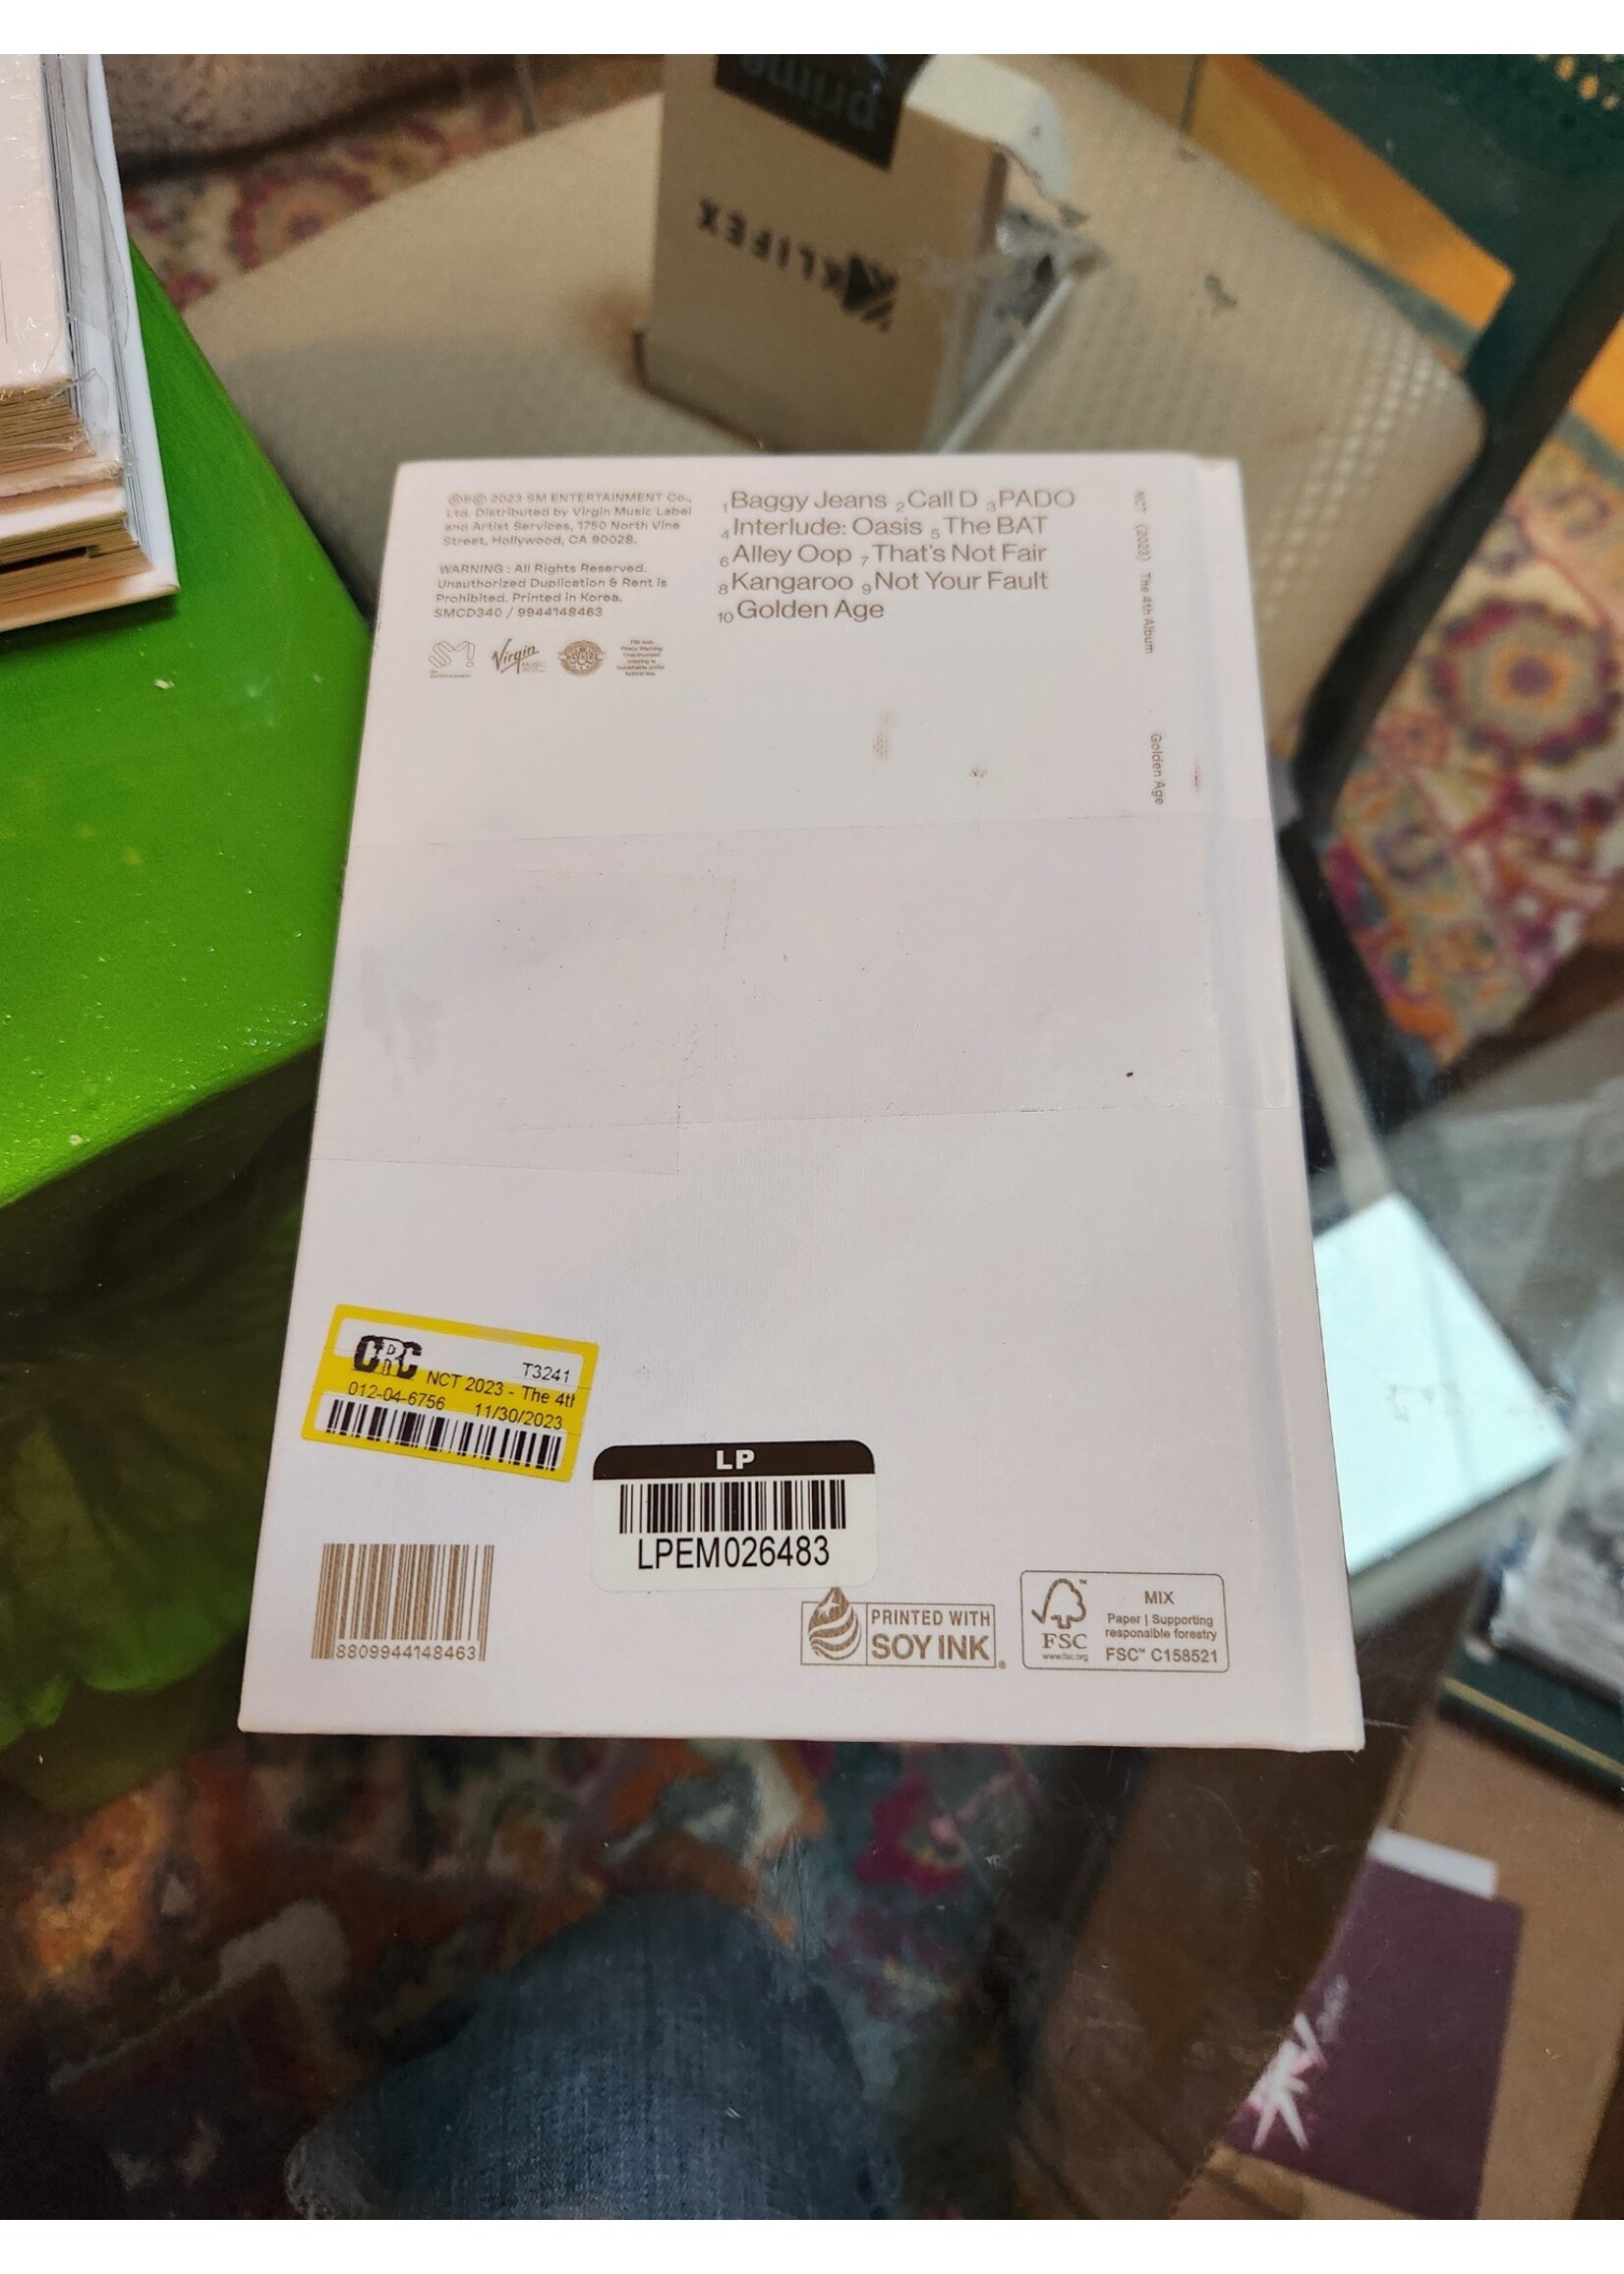 *Not Sealed* NCT 2023 - The 4th Album Golden Age CD (Target Exclusive)